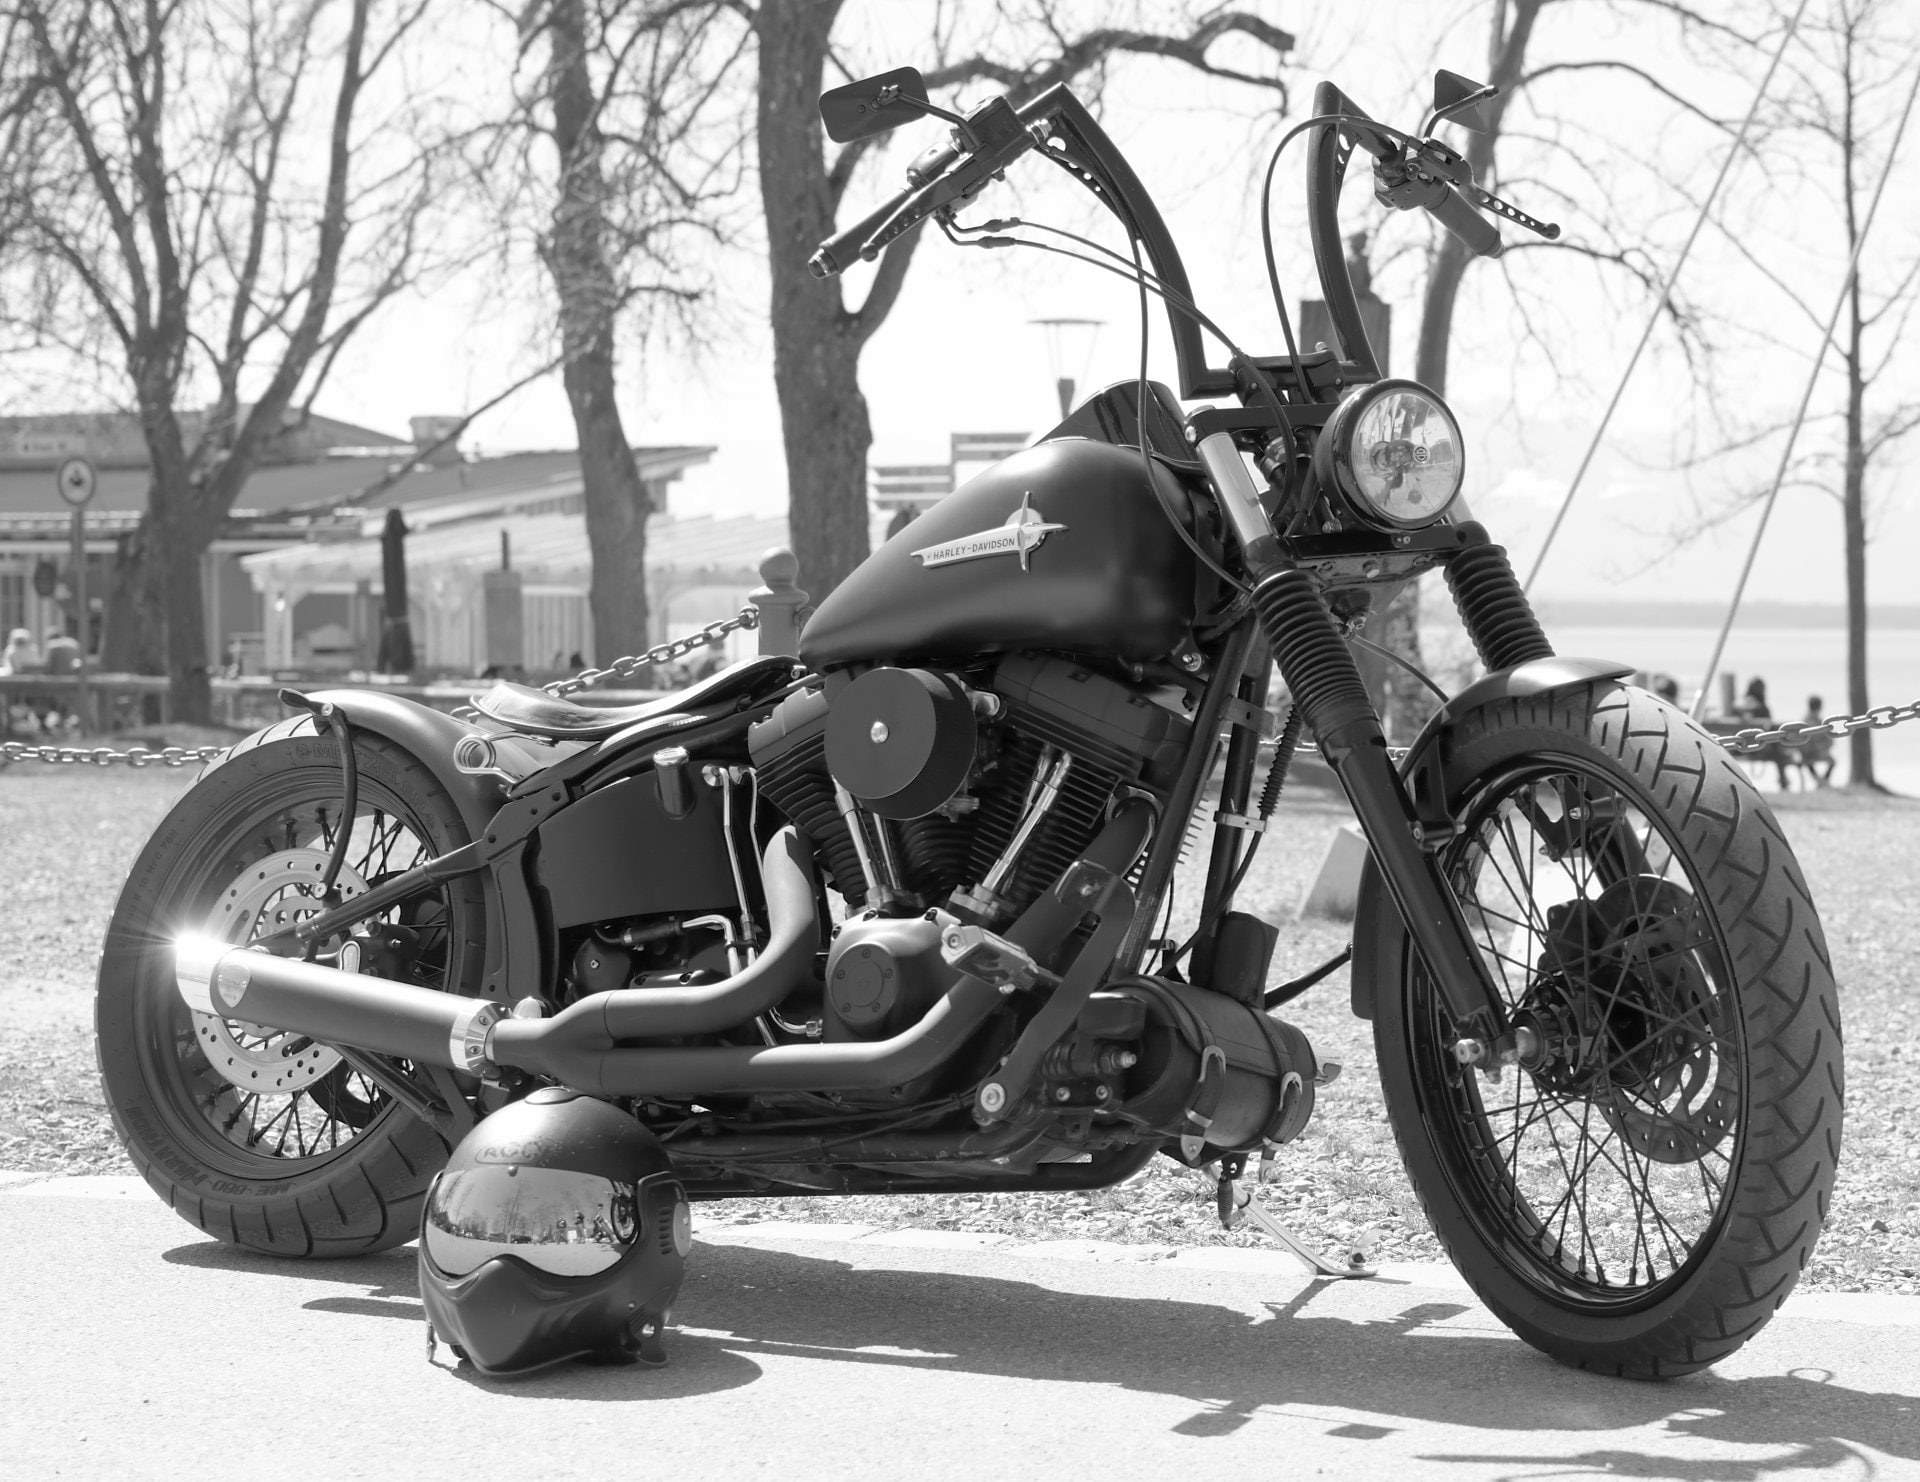 Motorbike Old Photo Black And White - HD Wallpaper 